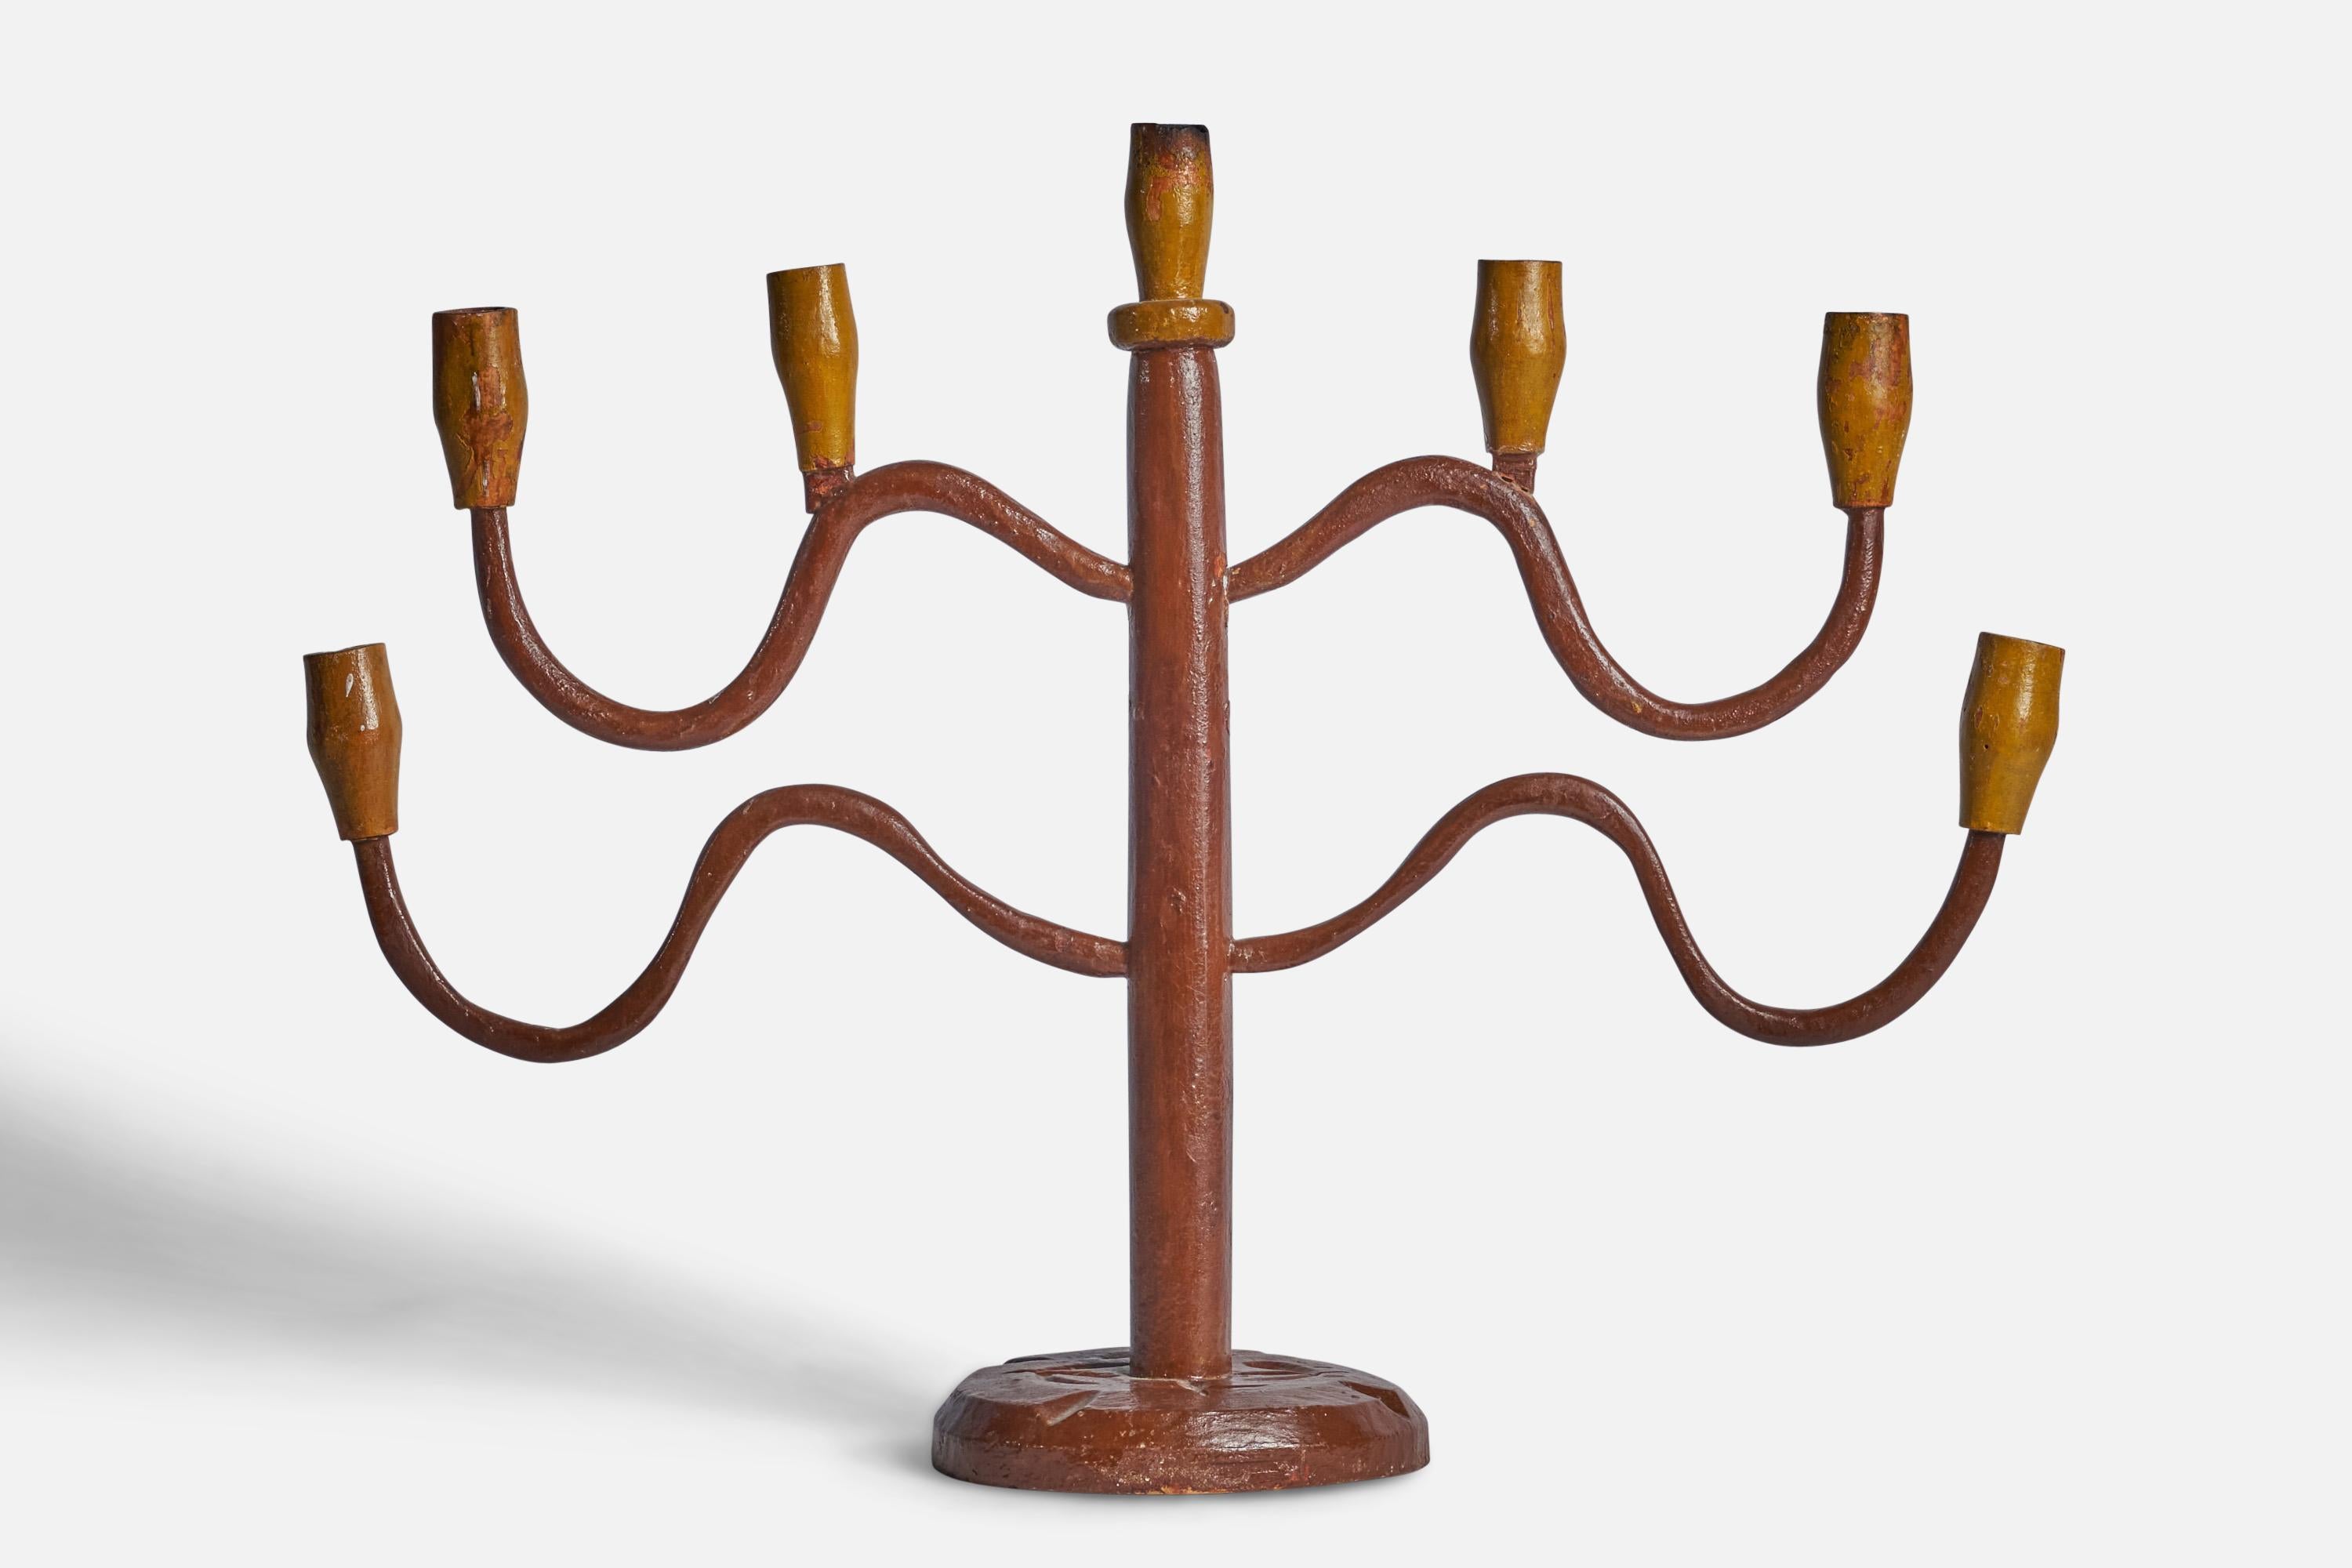 A brown and yellow-painted organic candelabra designed and produced in Sweden, c. 1900.

fits 0.70”-0.75” diameter candles